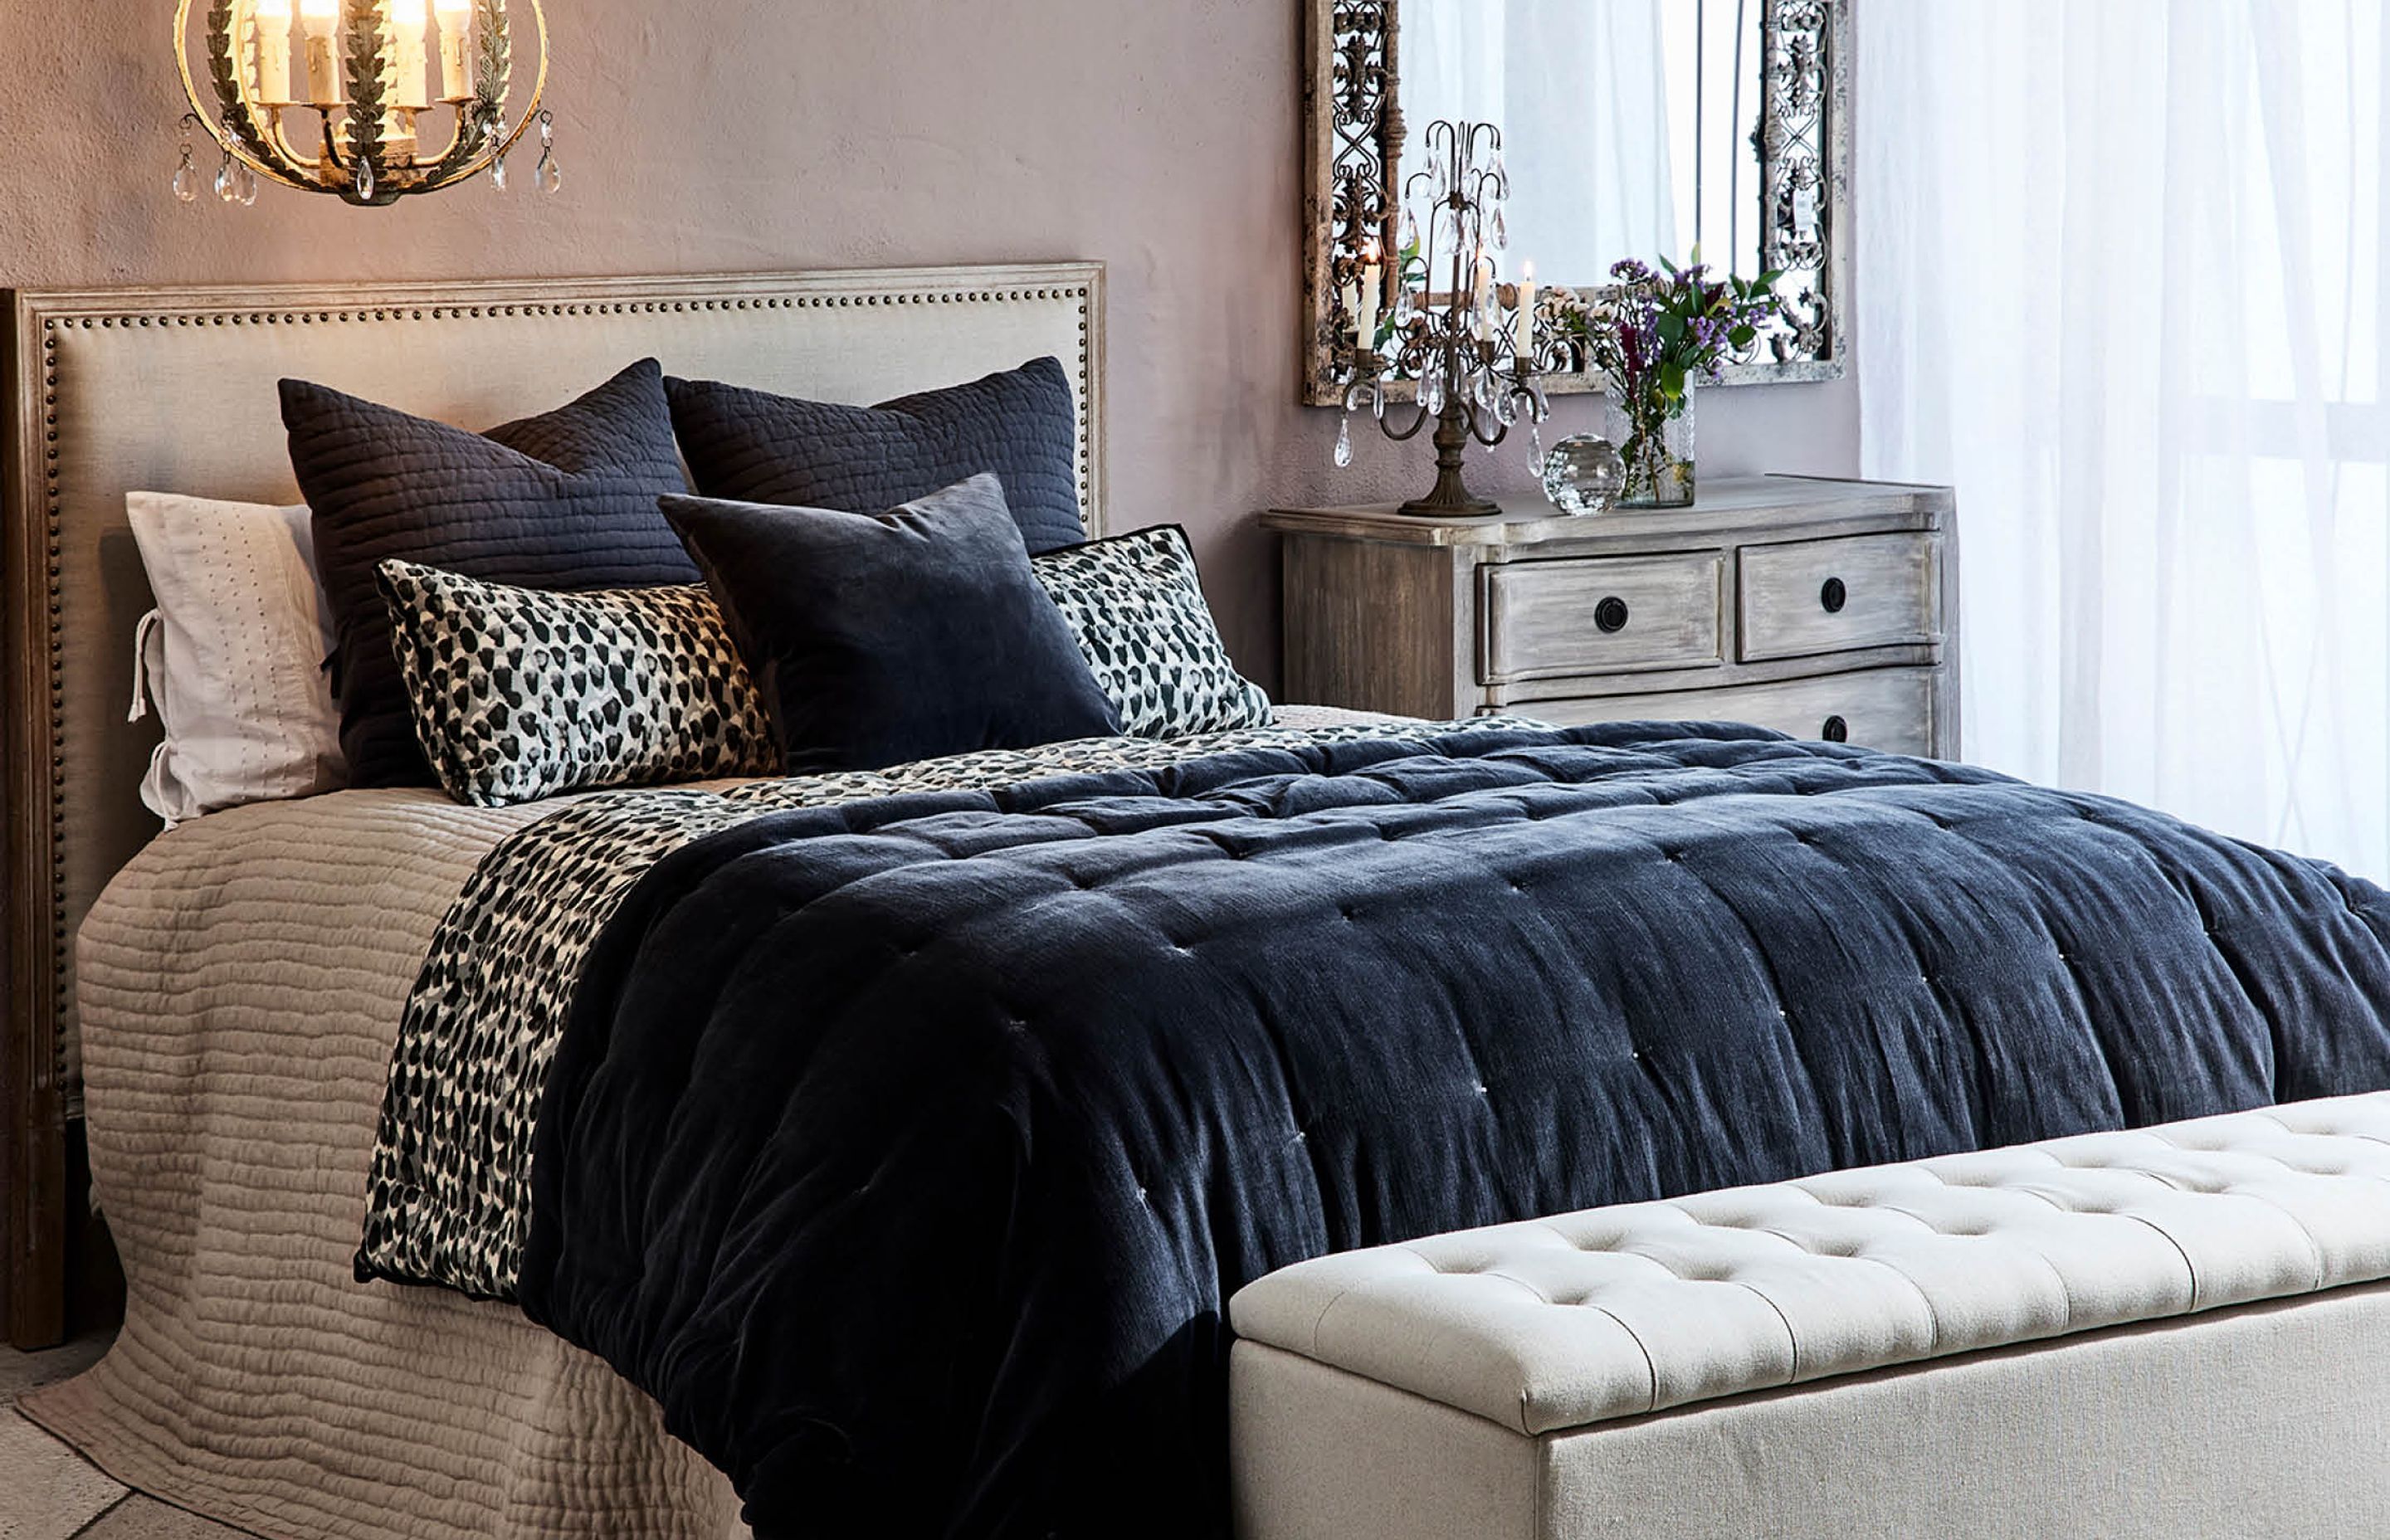 How To Create A Winter Bedroom